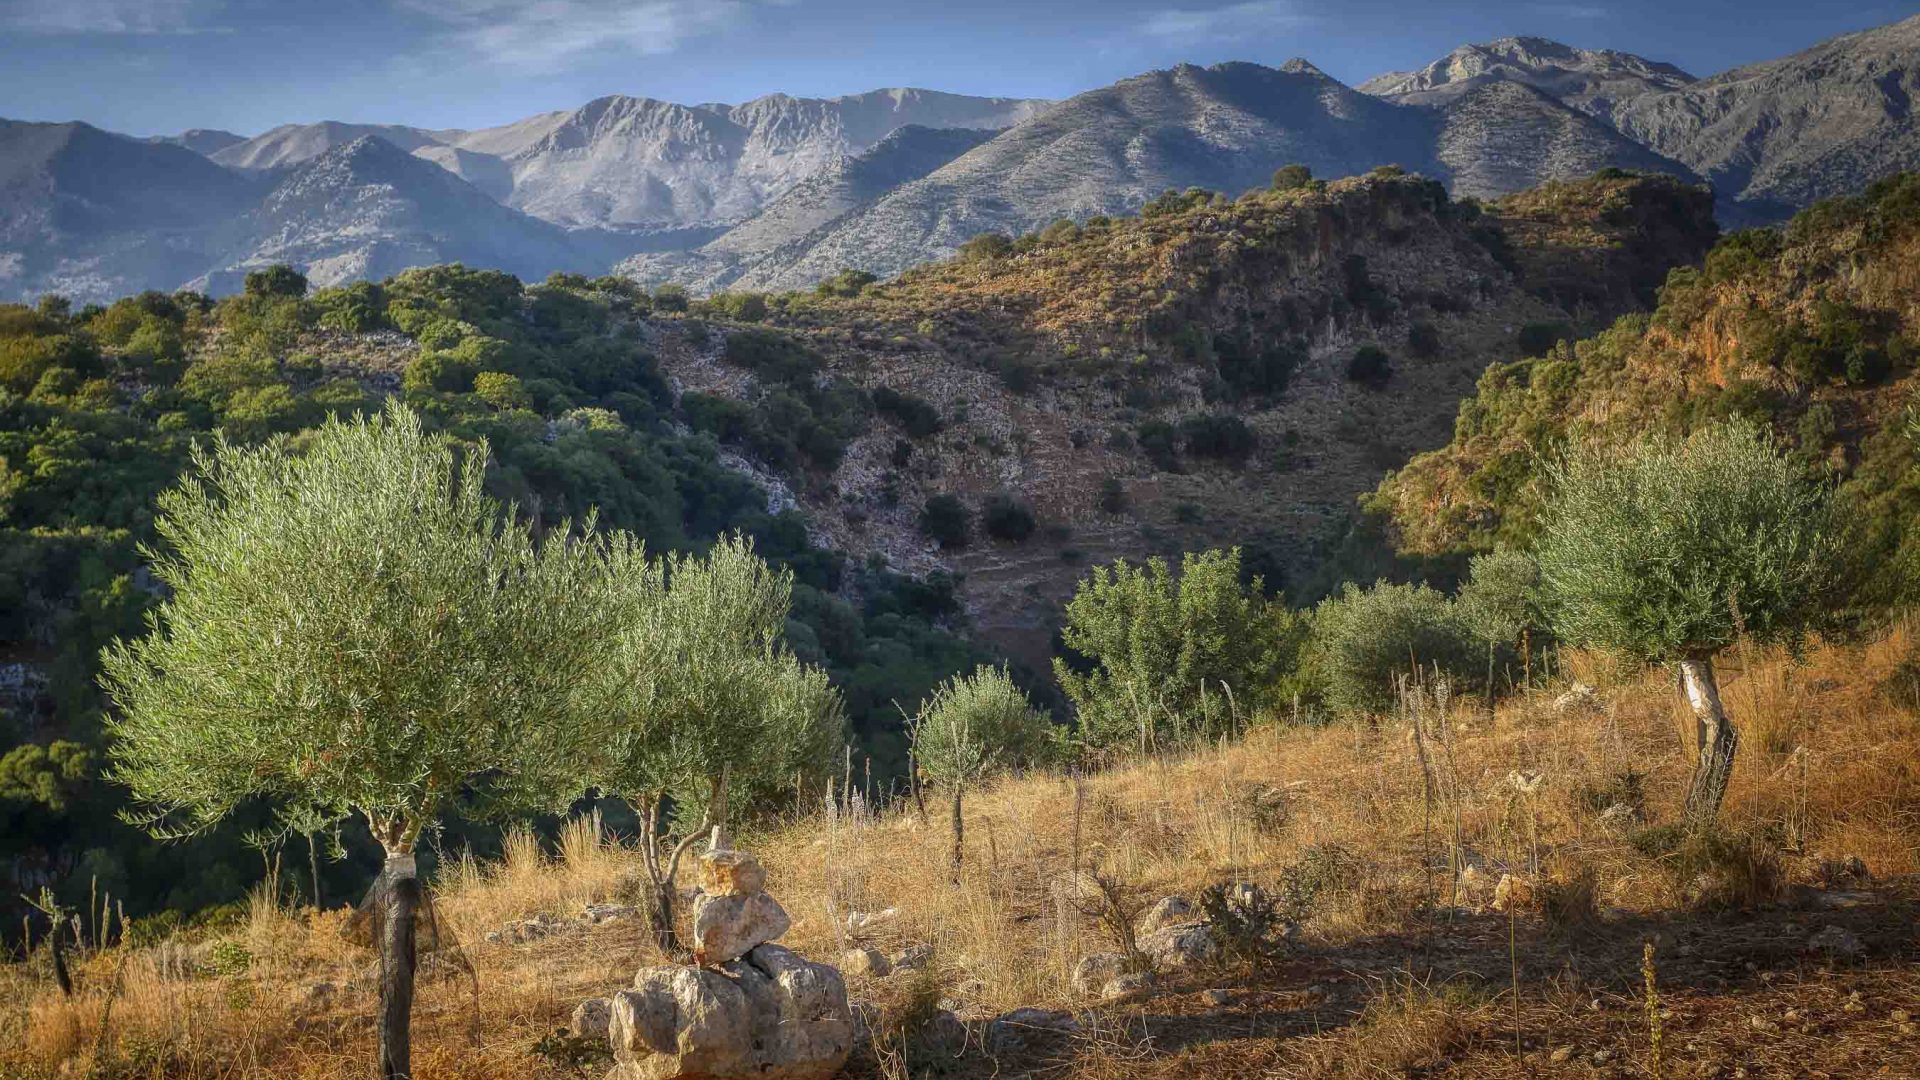 Olive trees in the foreground and green hills in the background.